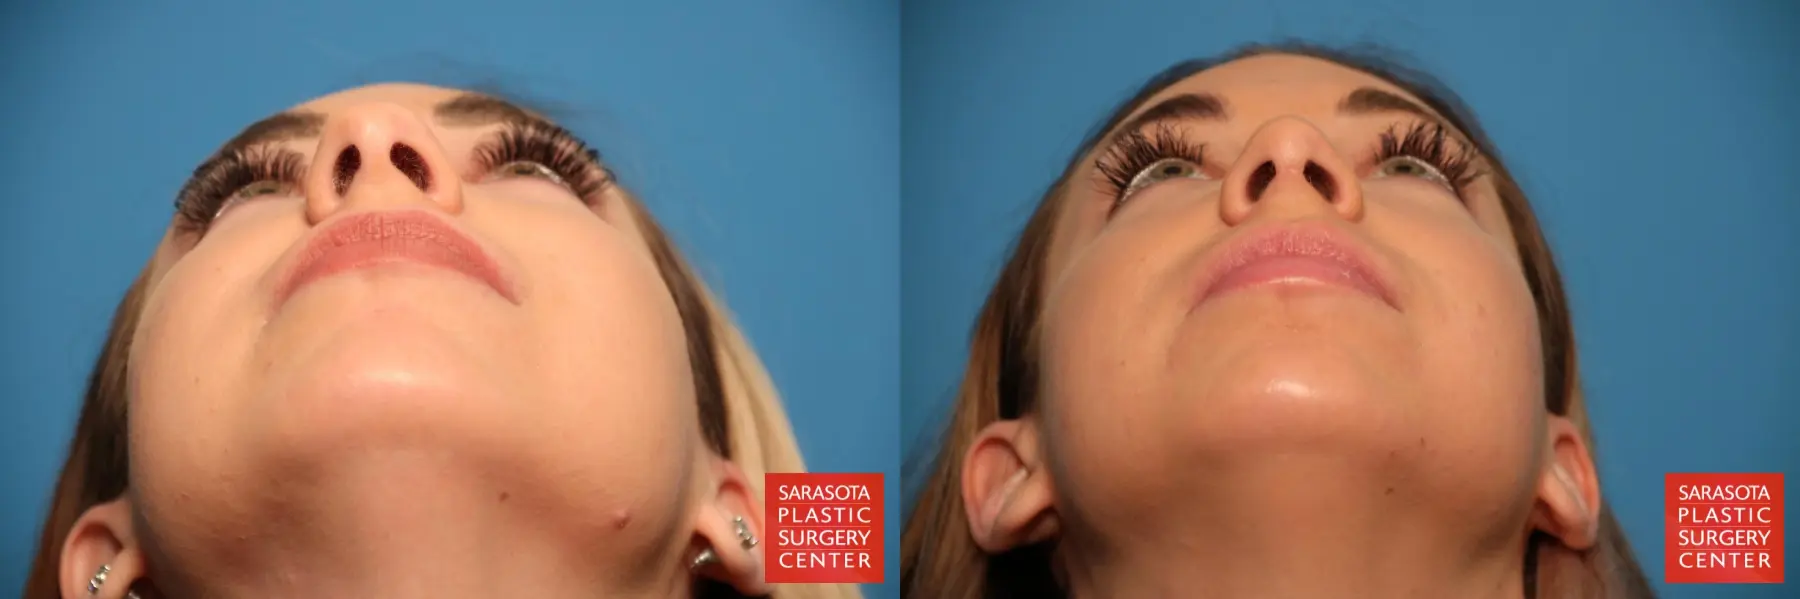 Rhinoplasty: Patient 5 - Before and After 2